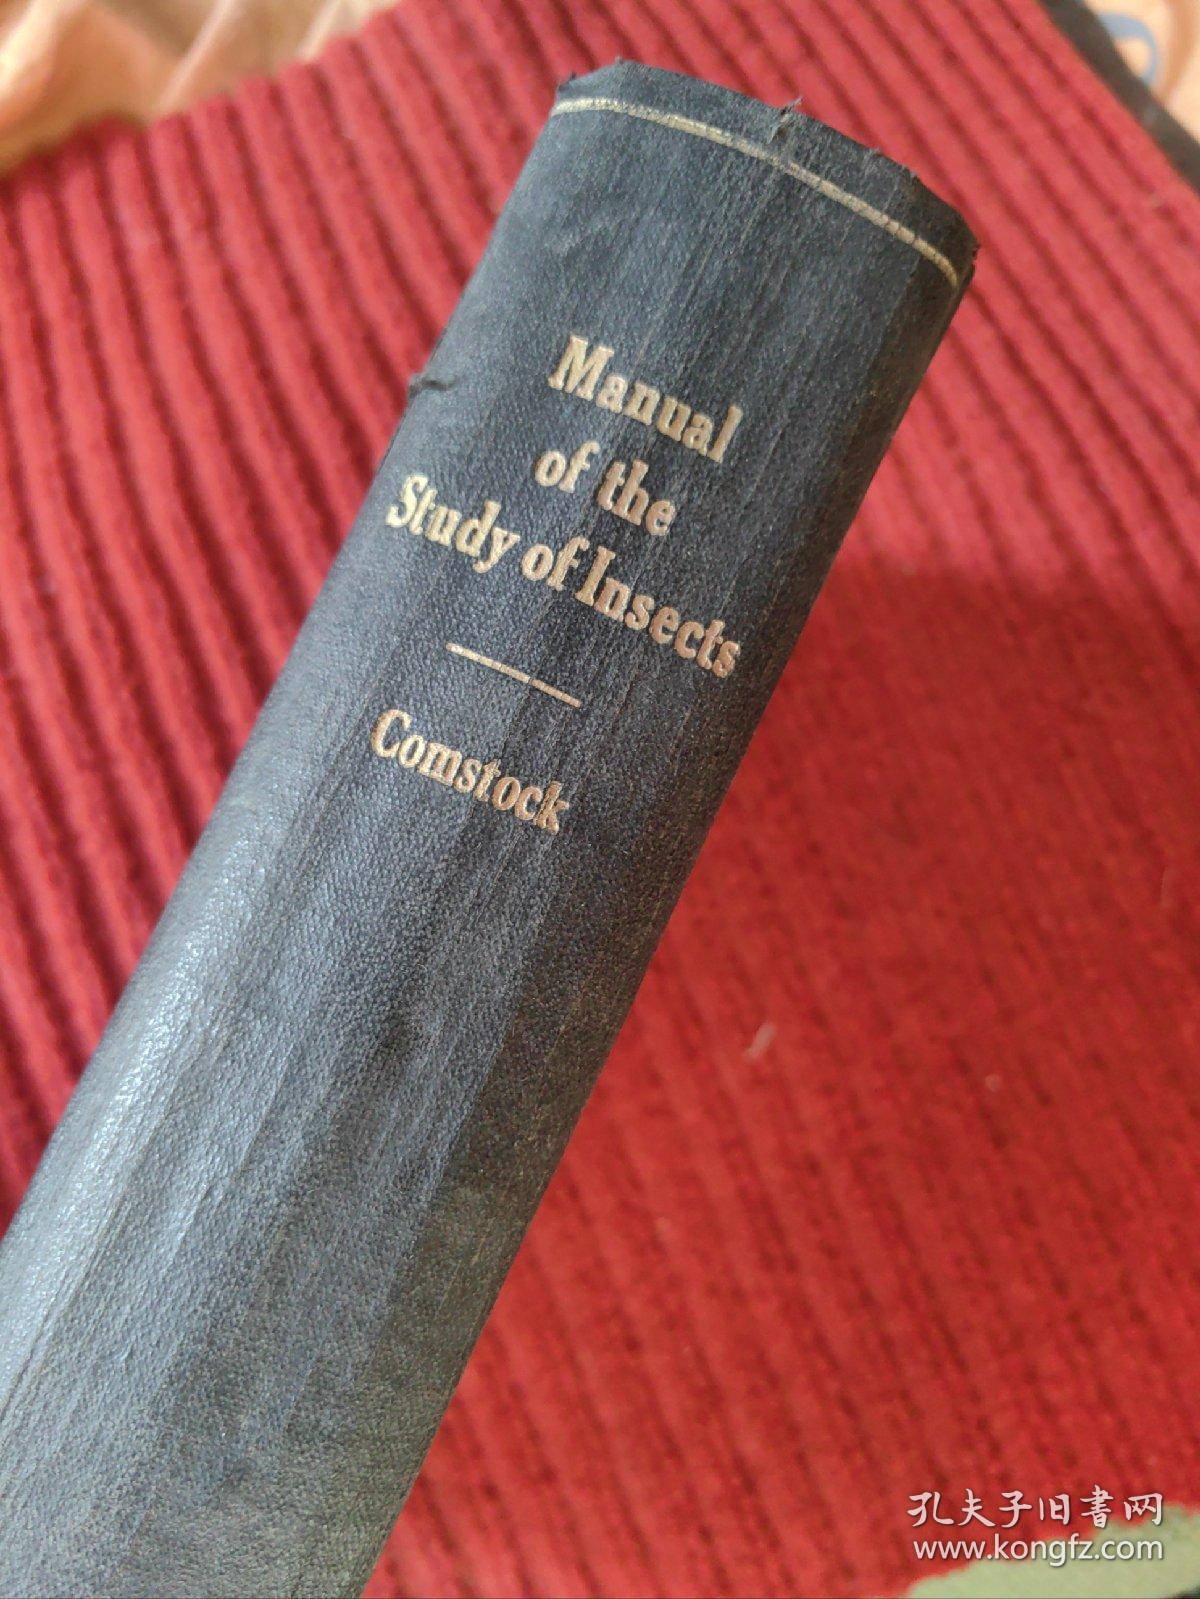 A Manual For The Study Of Insects (1895)【金陵大学馆藏。藏书票一枚】